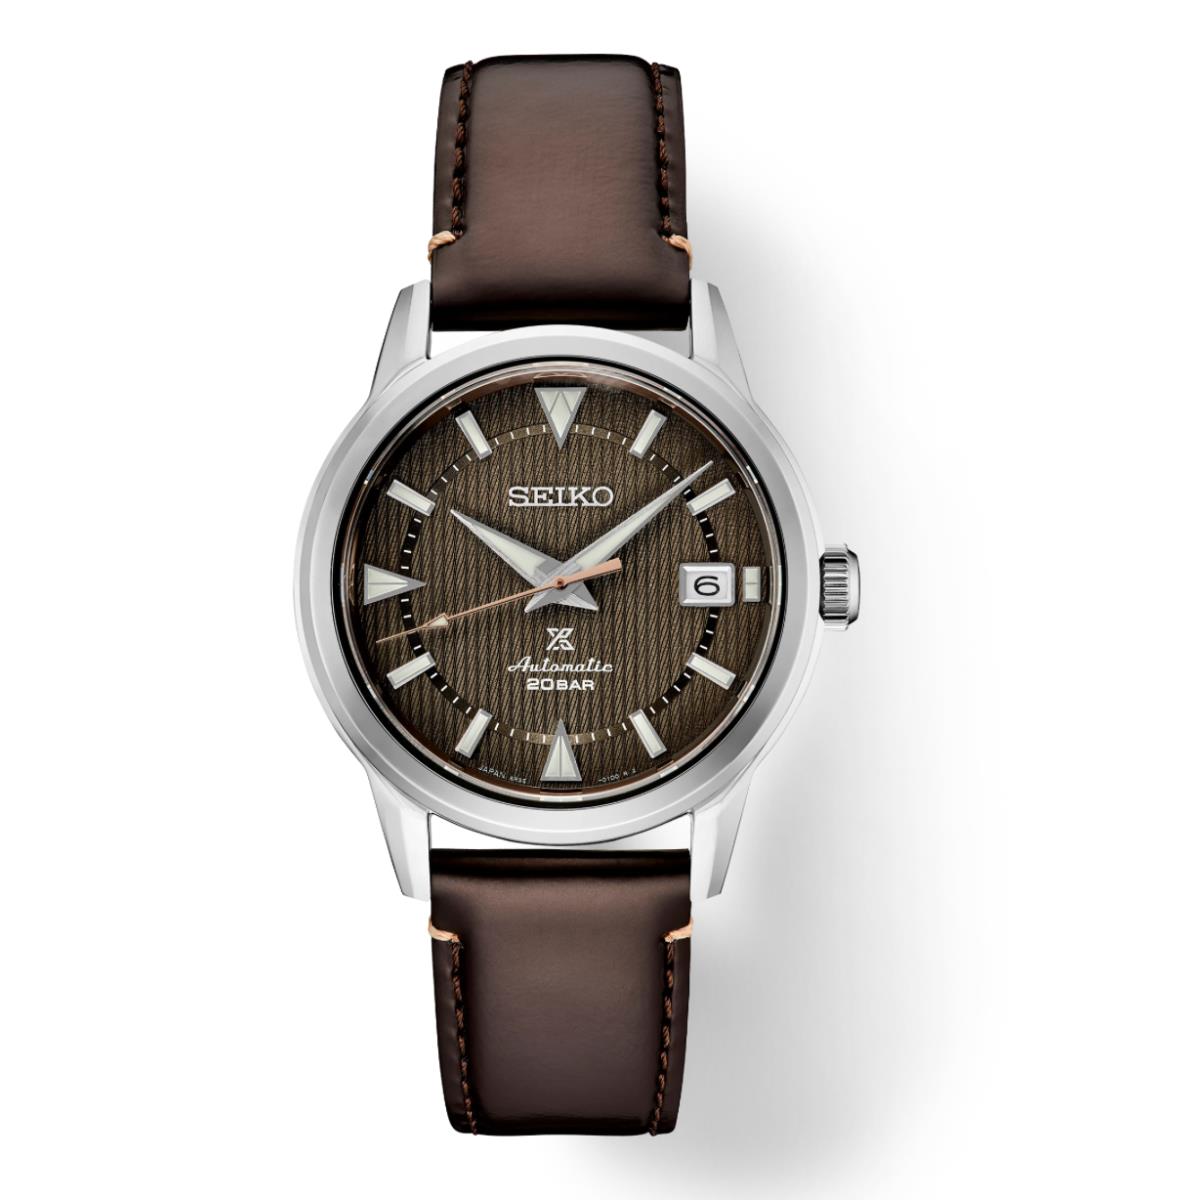 Seiko SPB251 Prospex Land Brown Patterned Dial 38mm Leather Automatic Mens Watch - Dial: Brown, Band: Brown, Bezel: Silver